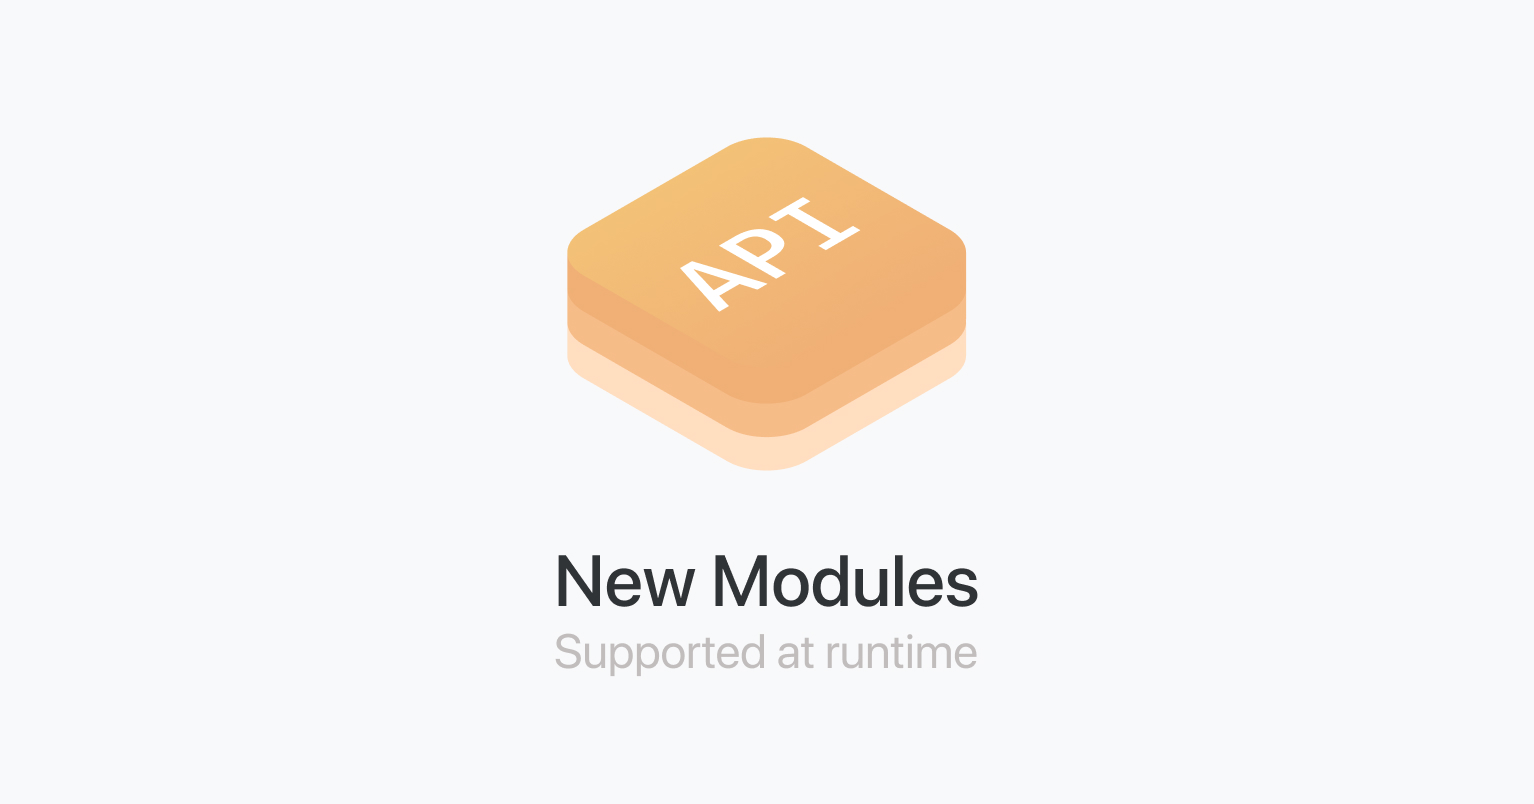 New modules supported at runtime